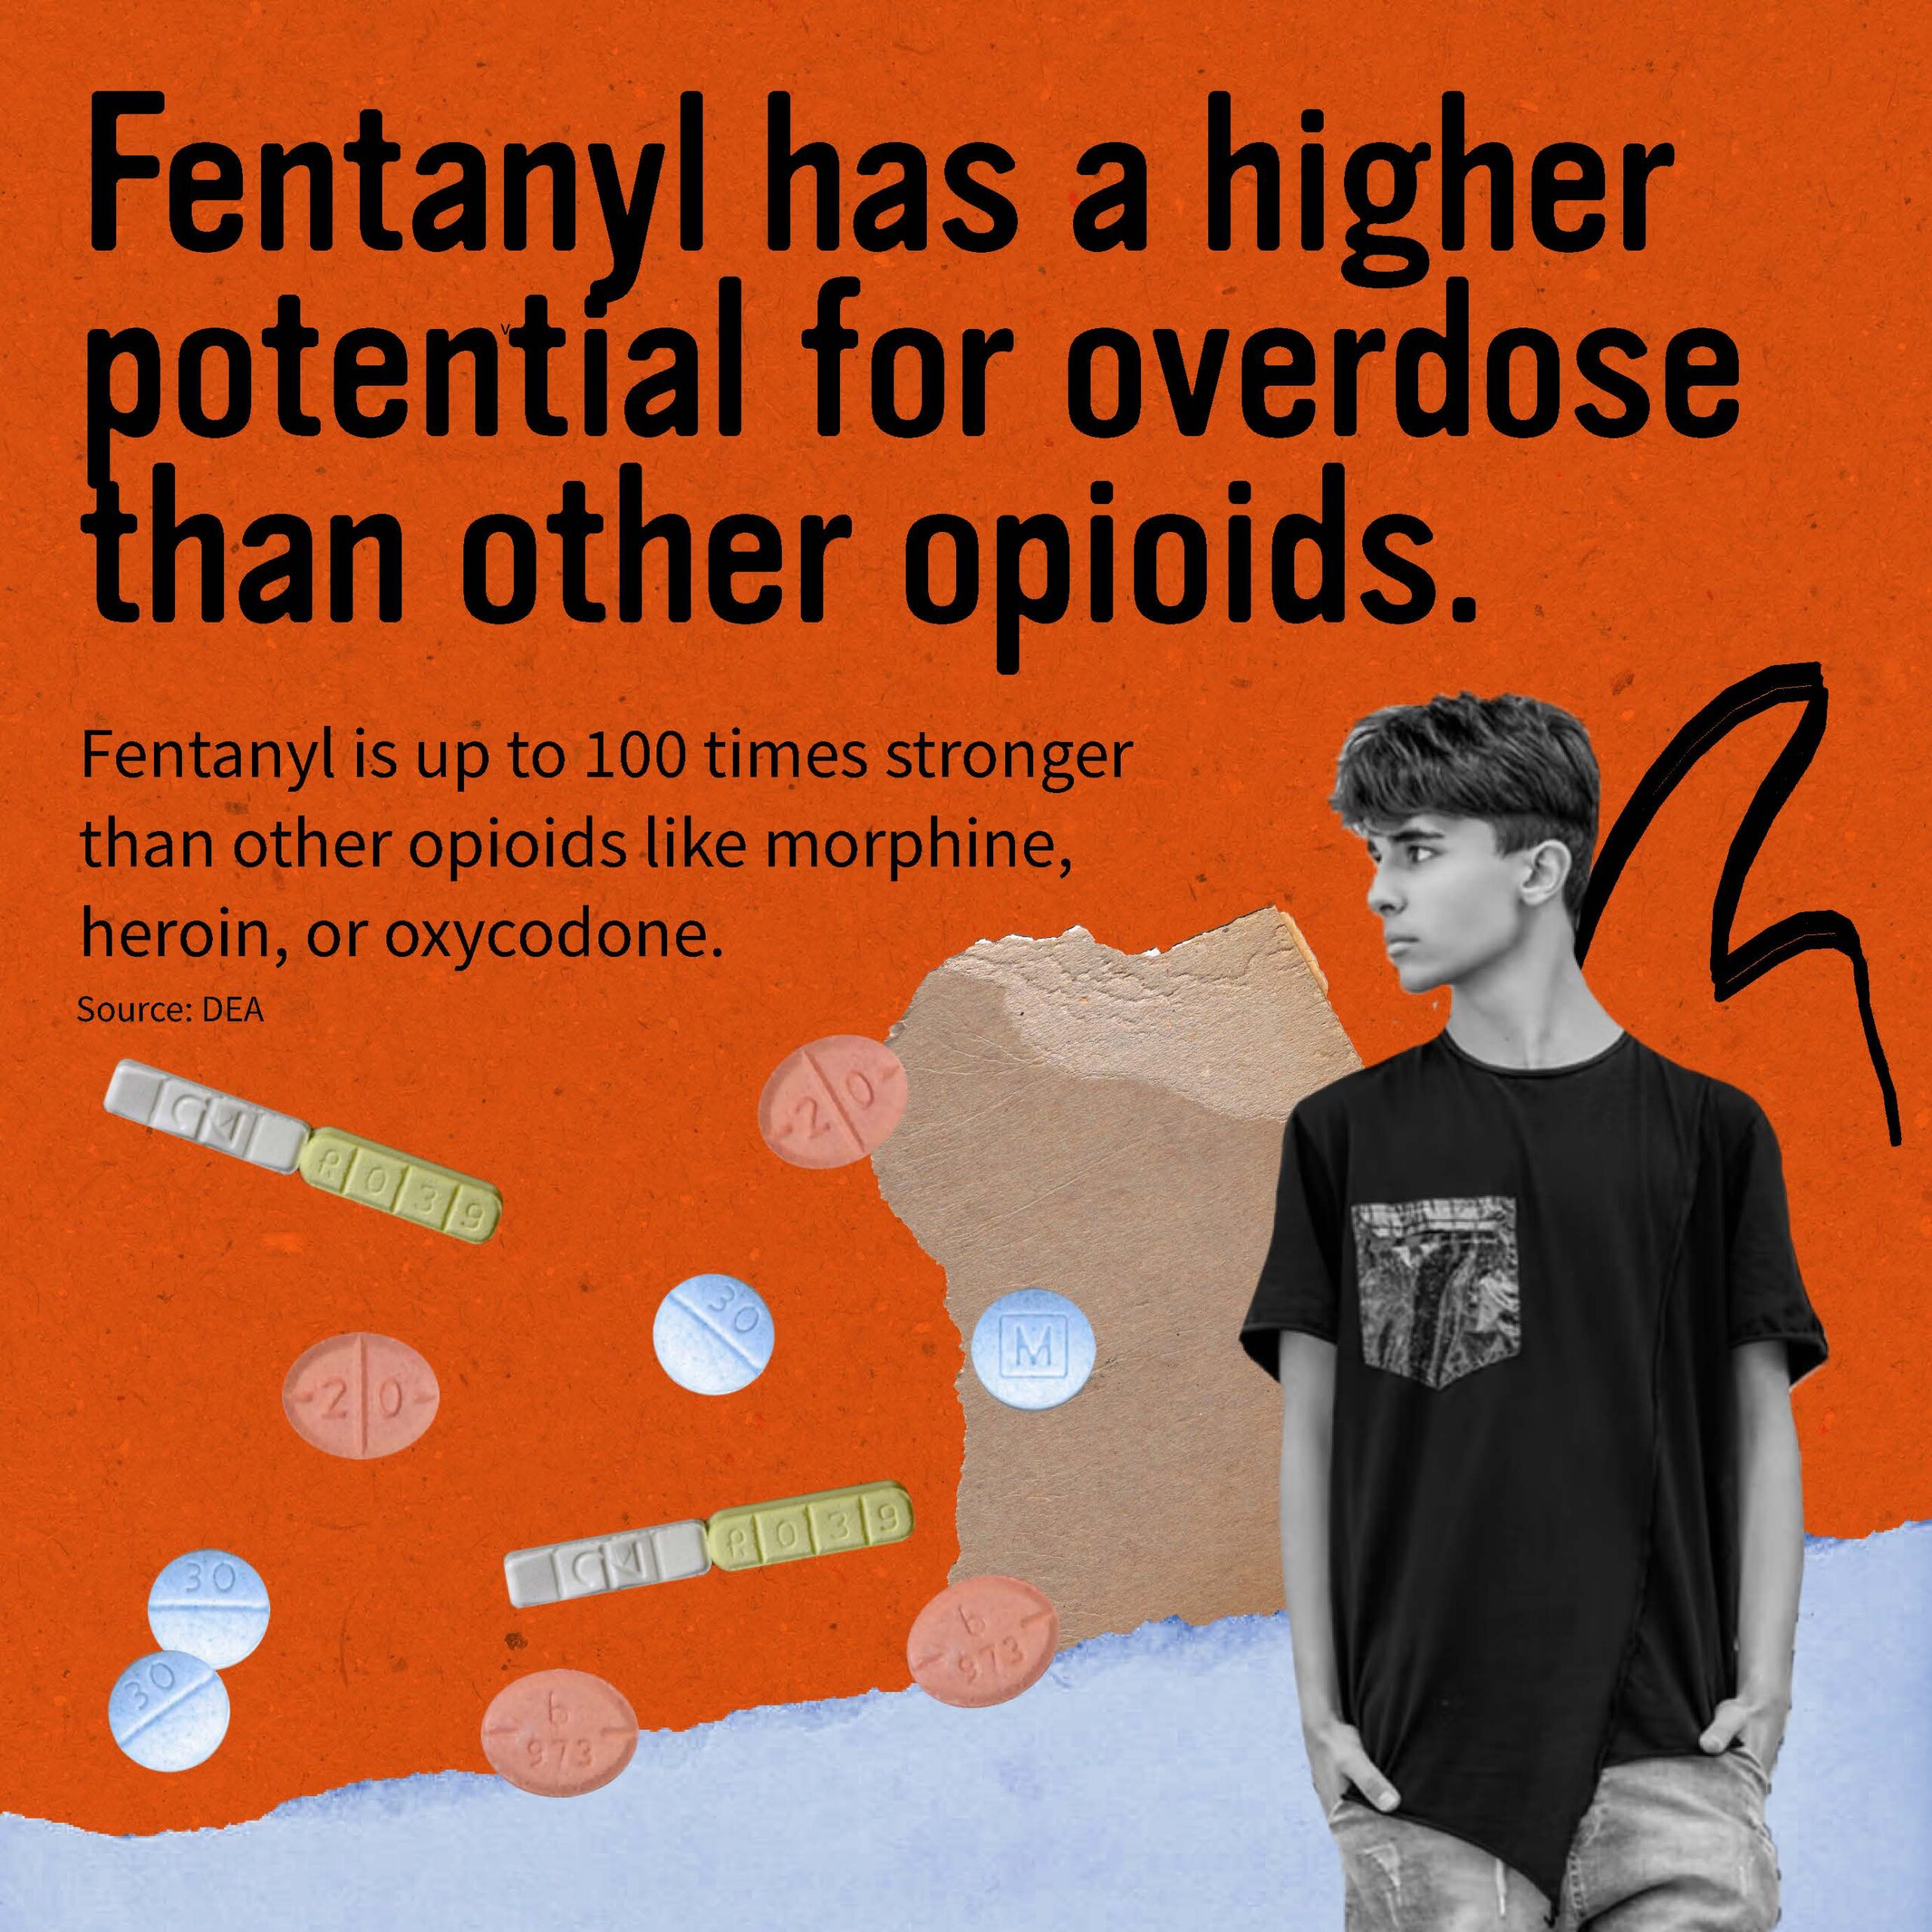 Fentanyl has a higher potential for overdose than other opioids